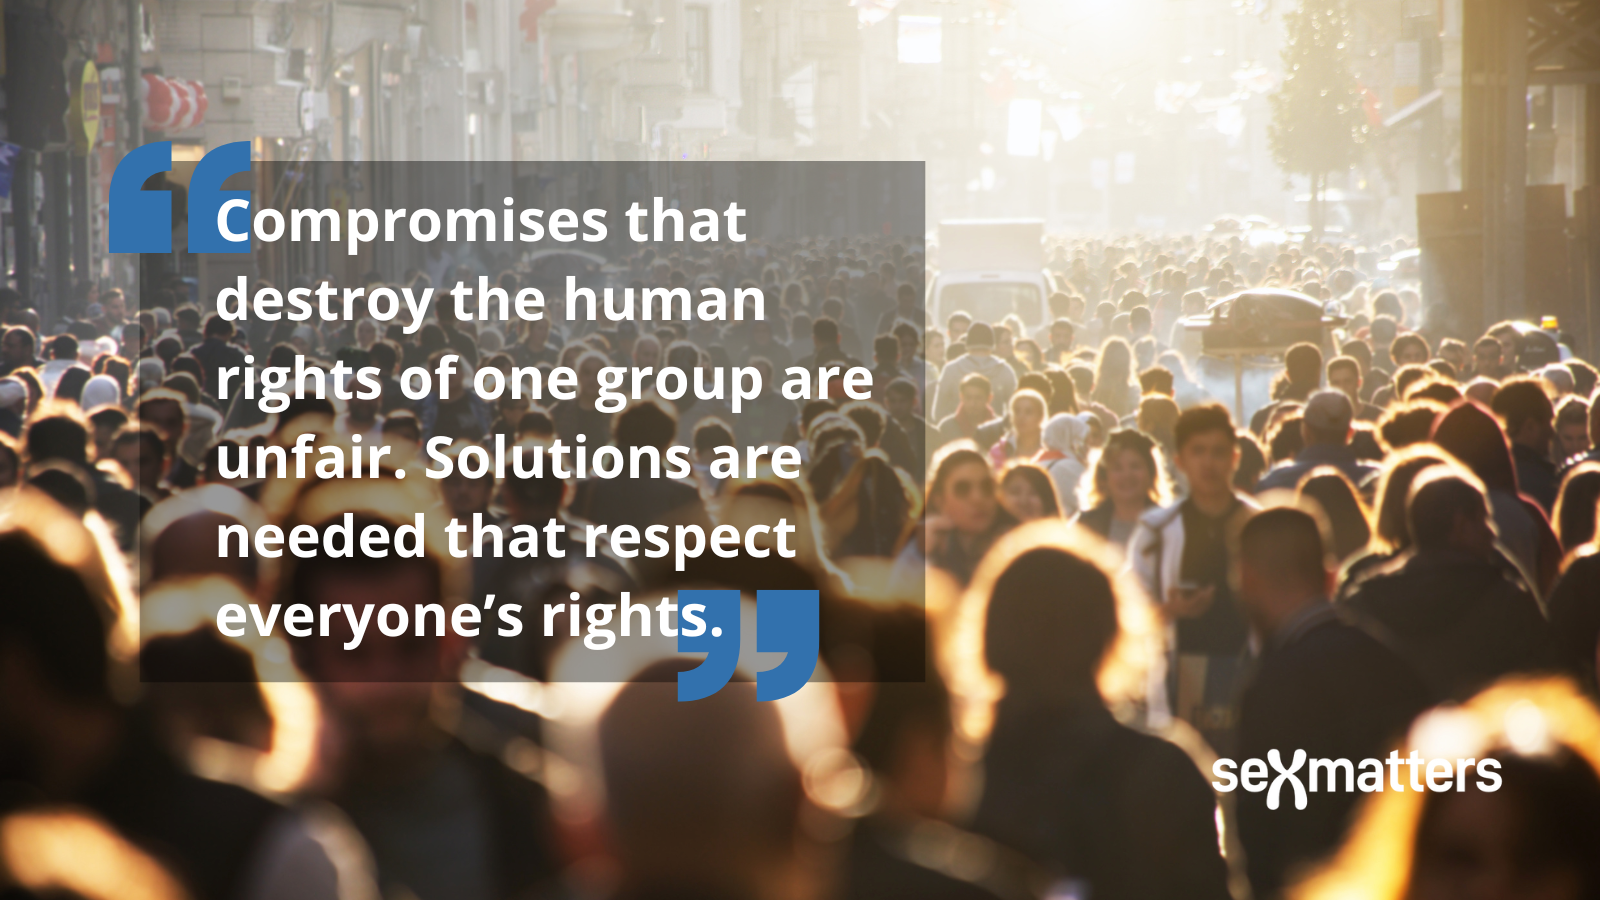 Compromises that destroy the human rights of one group are unfair. Solutions are needed that respect everyone’s rights.